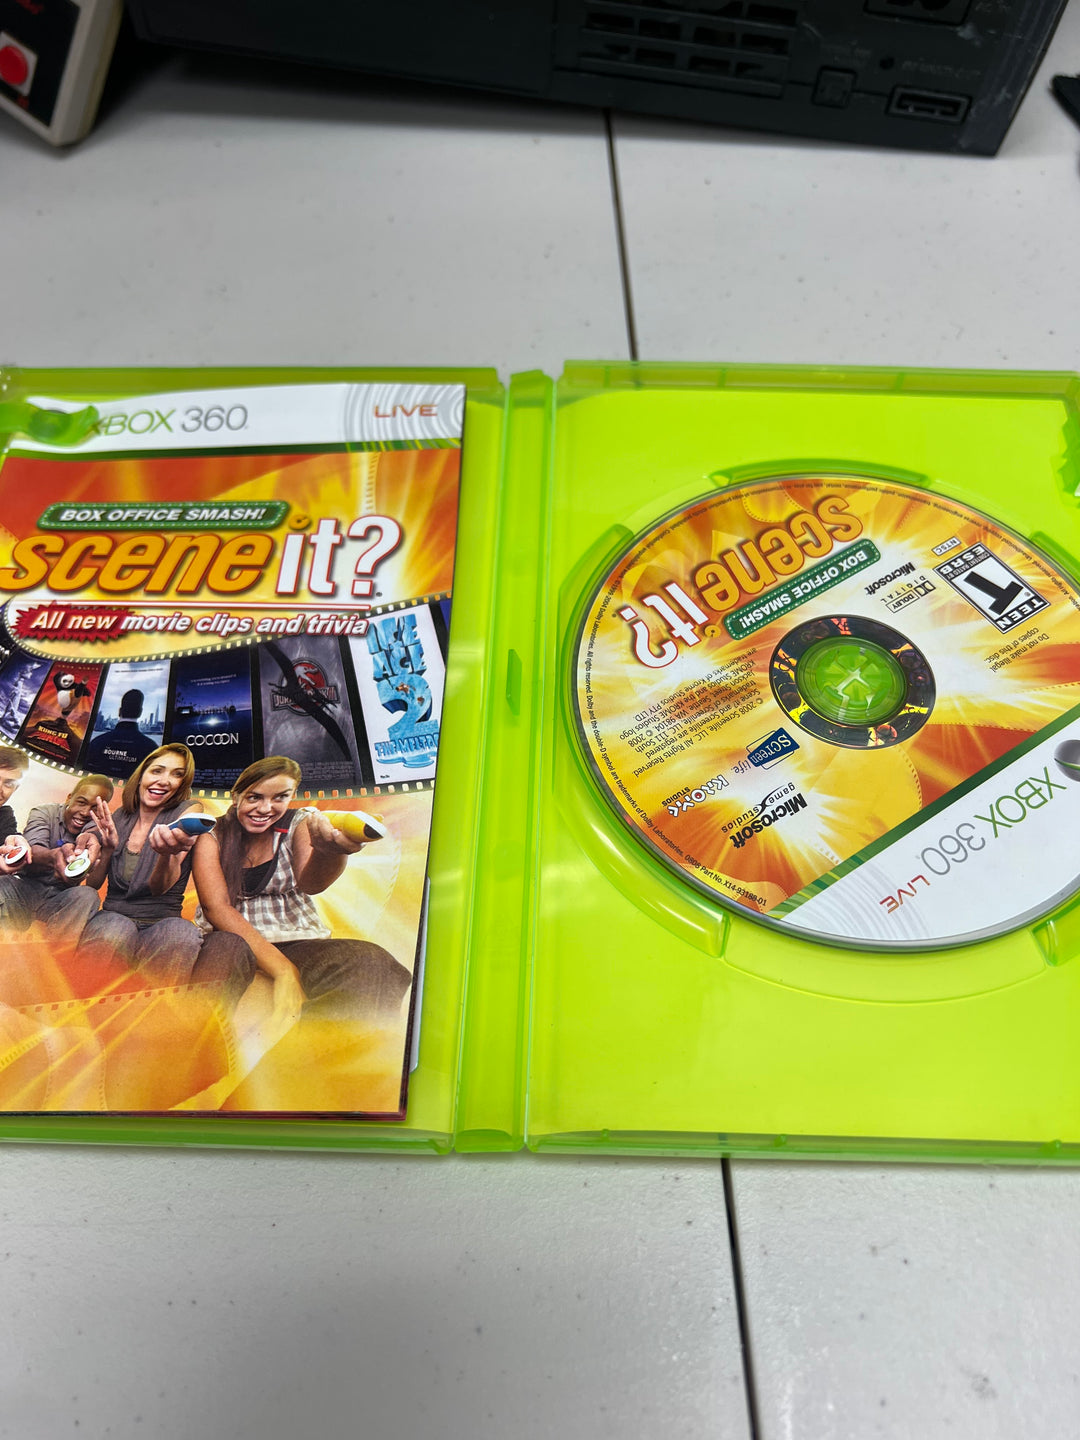 Scene It? Box Office Smash for Microsoft Xbox 360 in case. Tested and working.     DO61024